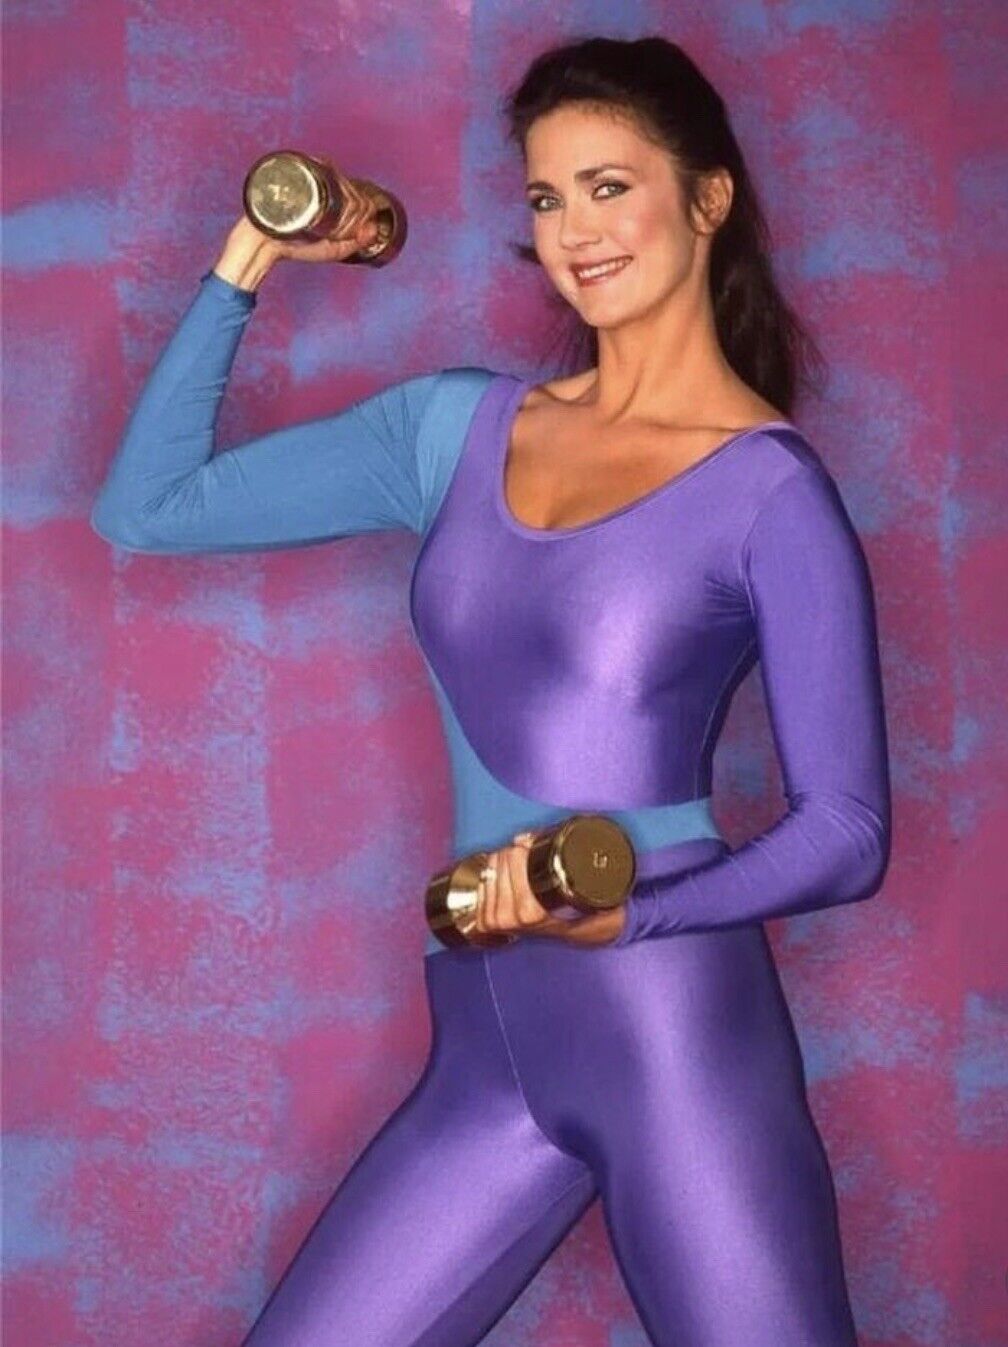 LYNDA CARTER - IN AN EXERCISE OUTFIT 